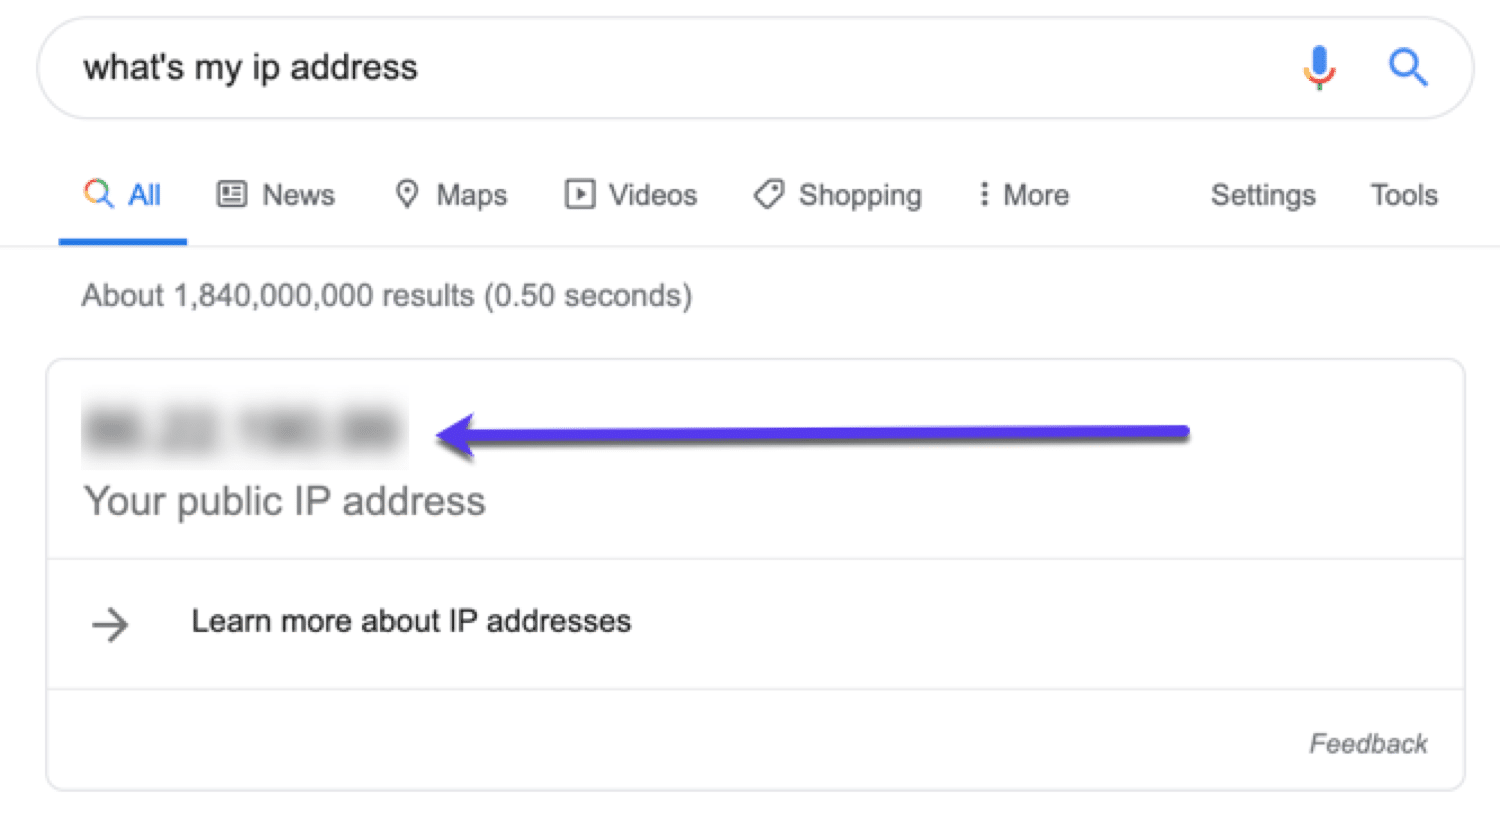 Use Google to quickly find your IP address